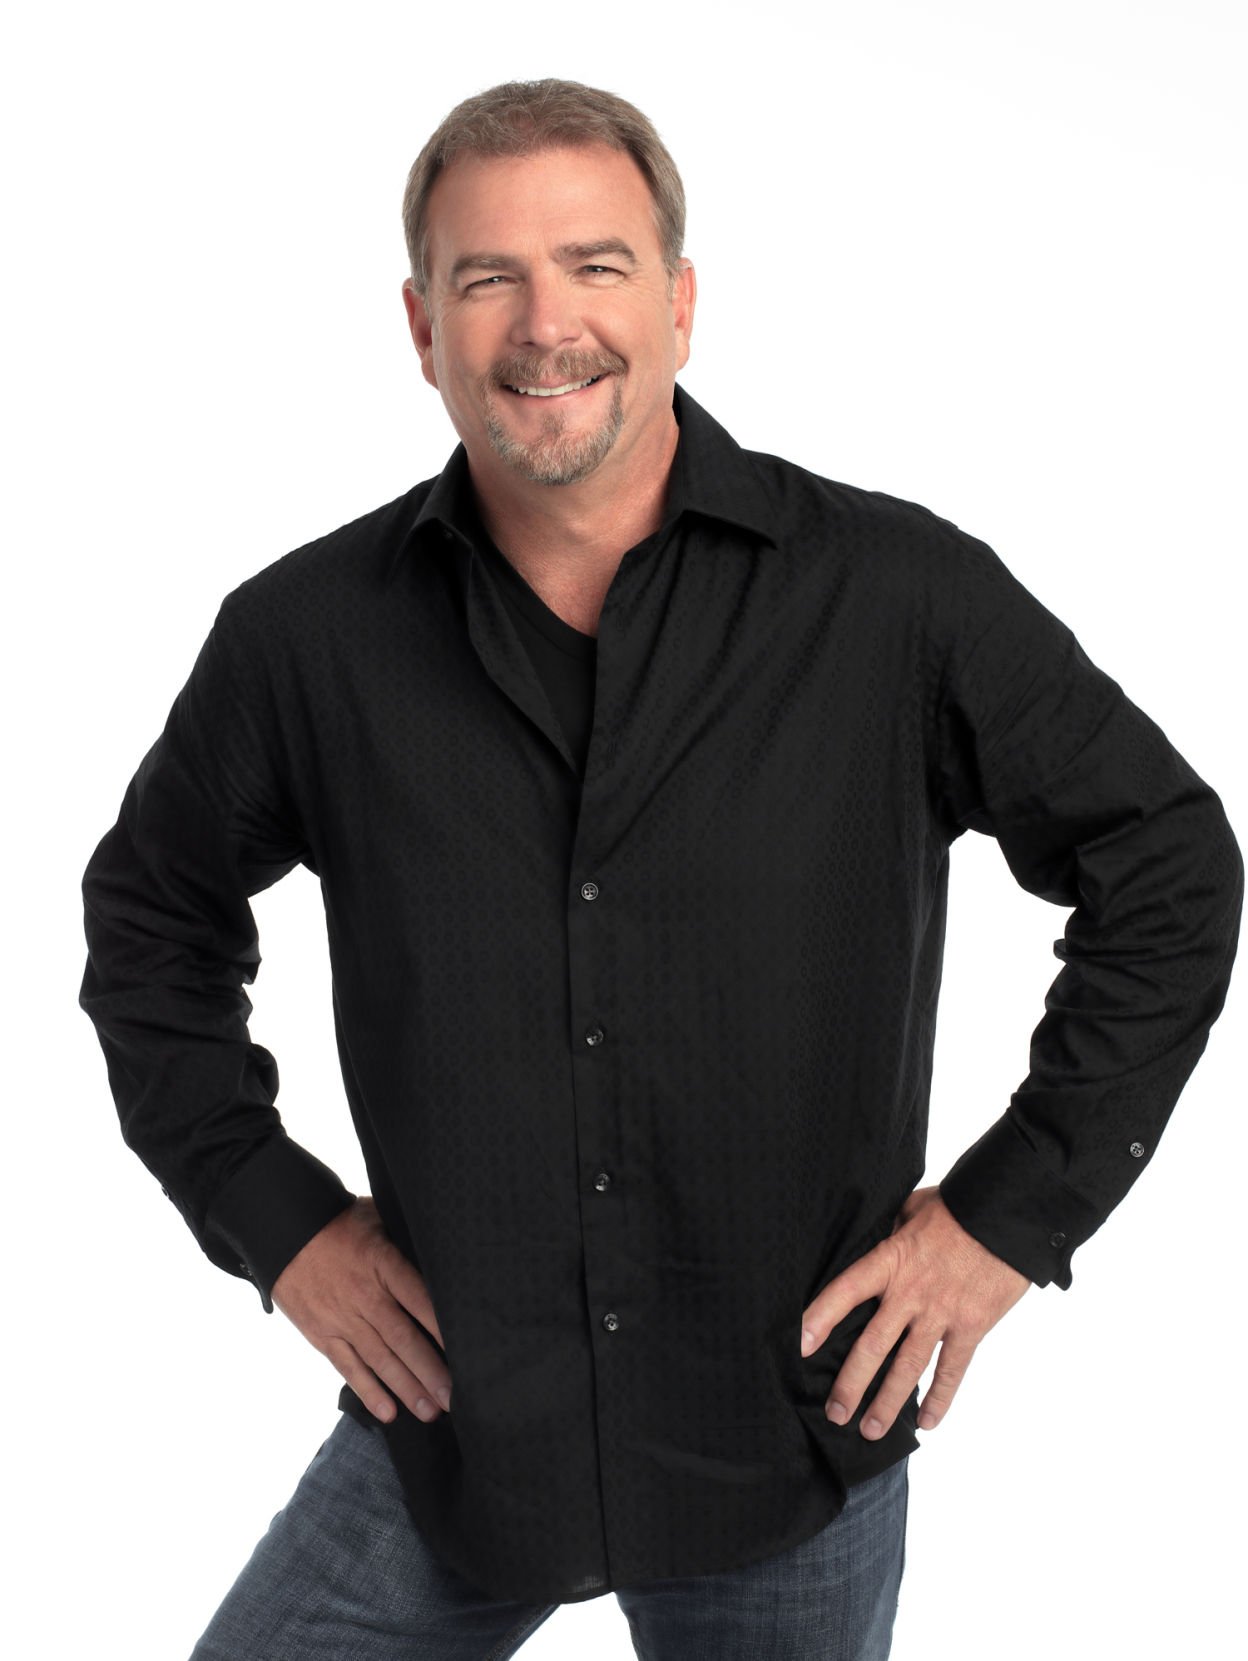 Bill Engvall My job is to make people